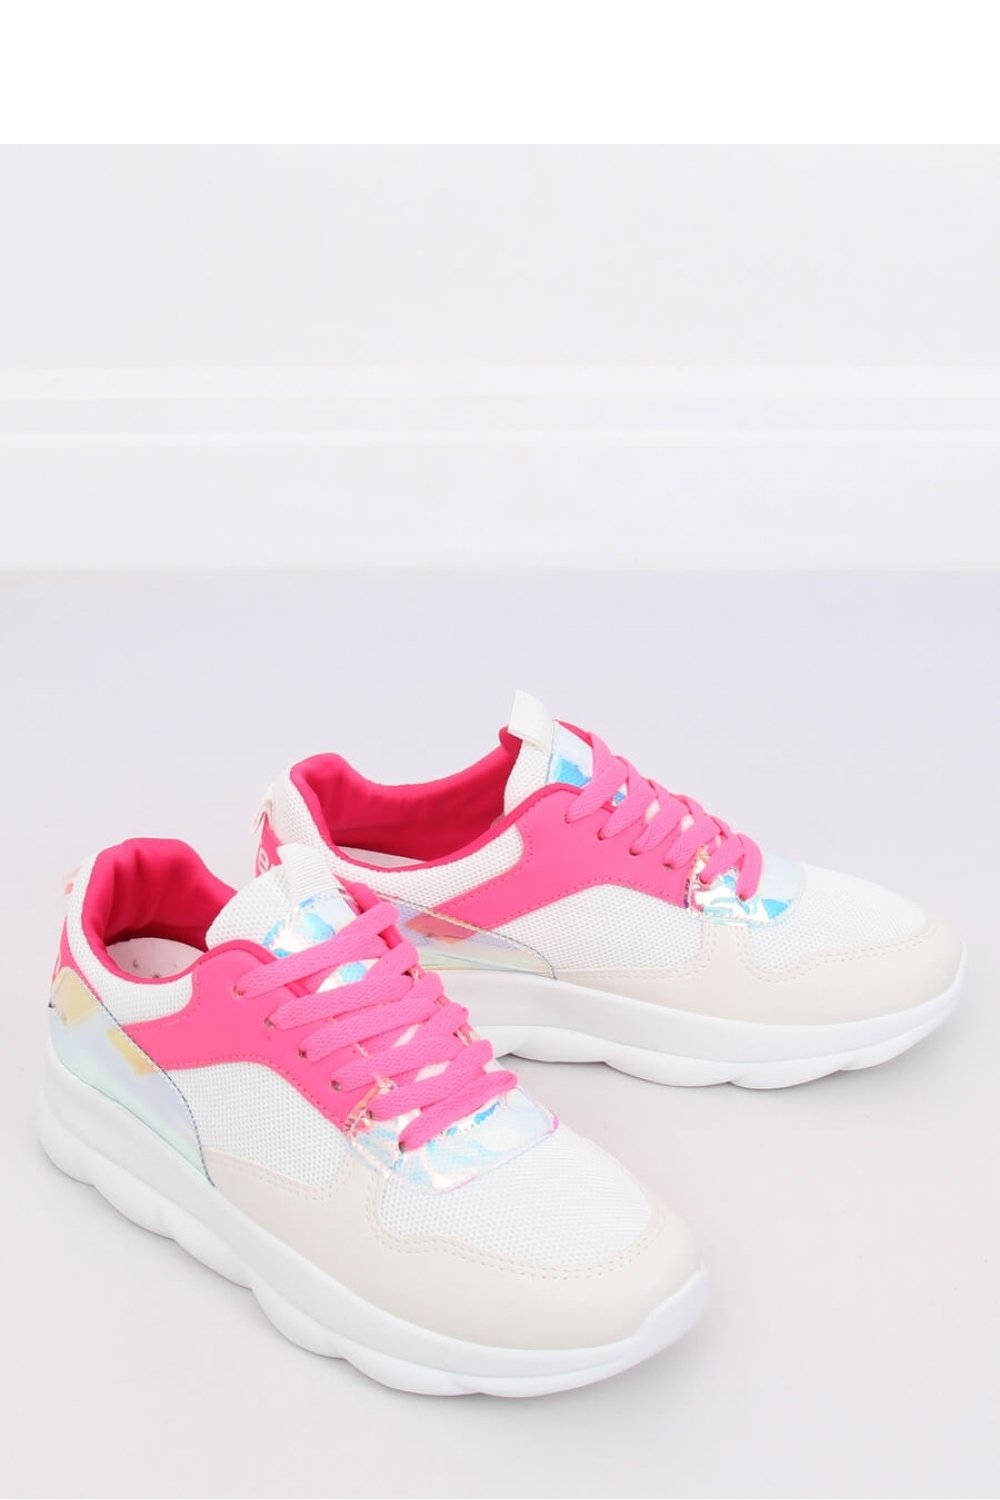 Lace-up Pink Holographic Sneakers